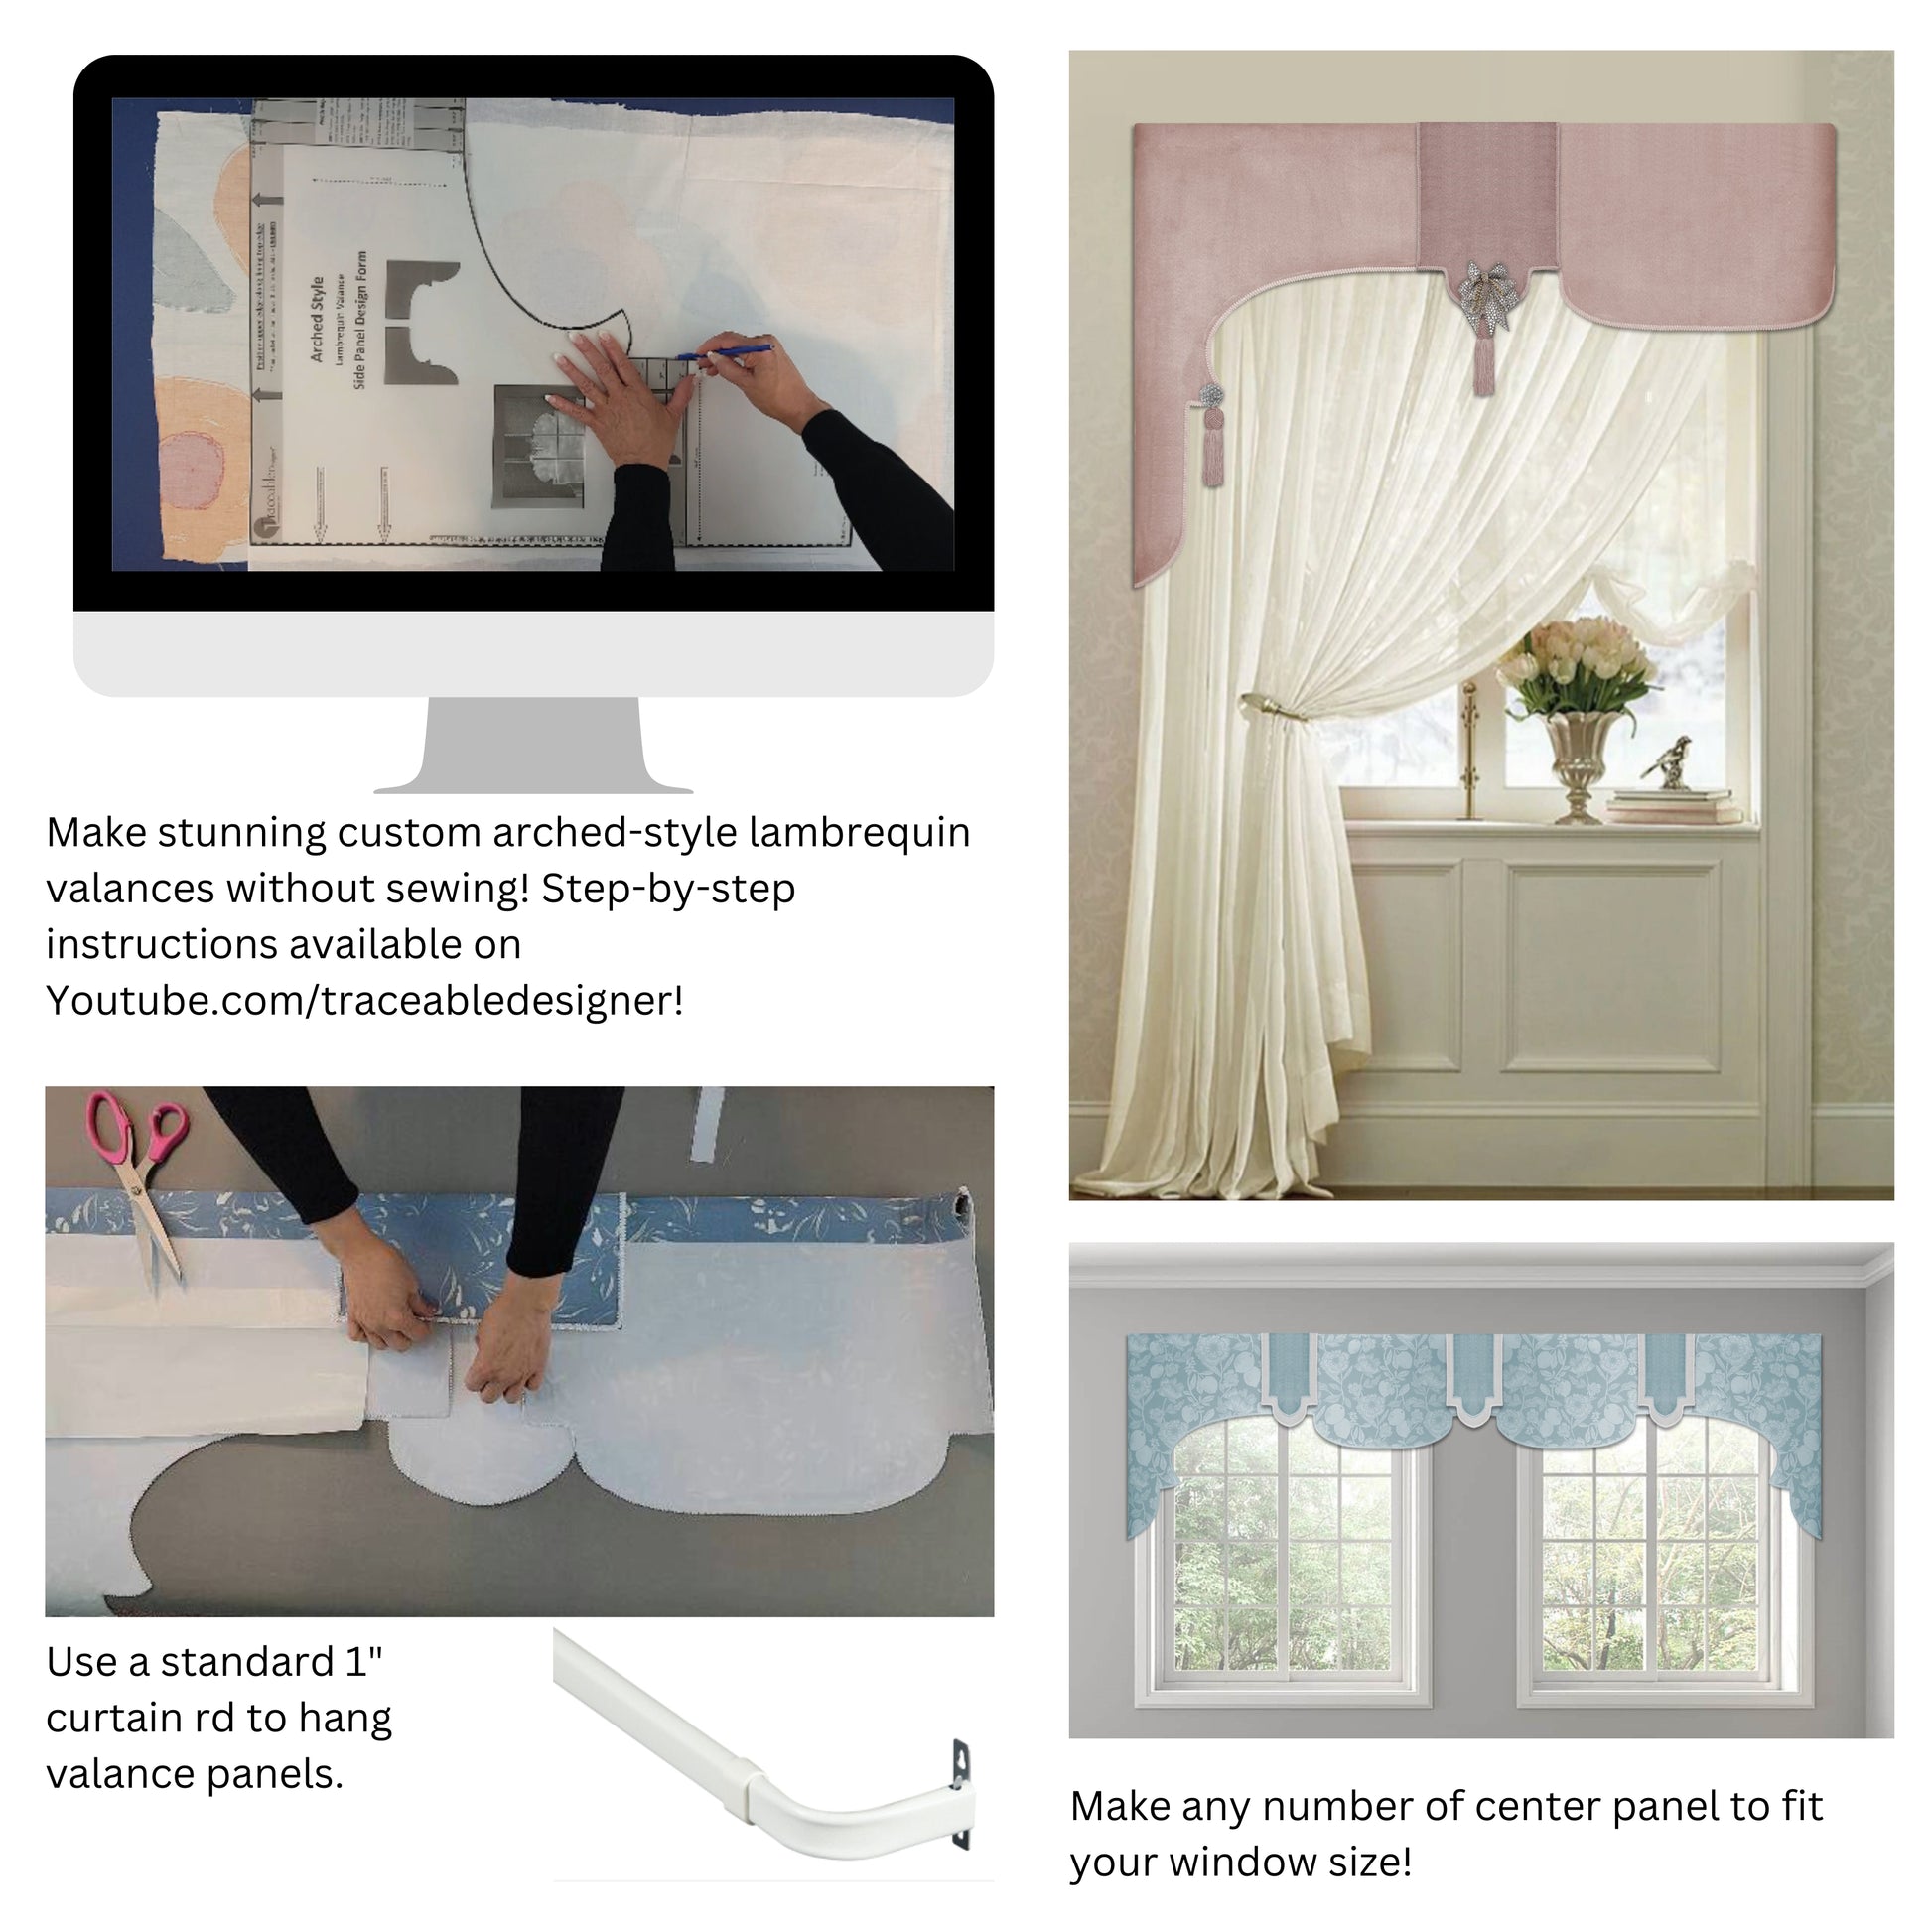 Traceable Designer arched style no-sew lambrequin valance kit inlcudes traceable valance design forms used to make custom valances without sewing. Use a 1" curtain rod.